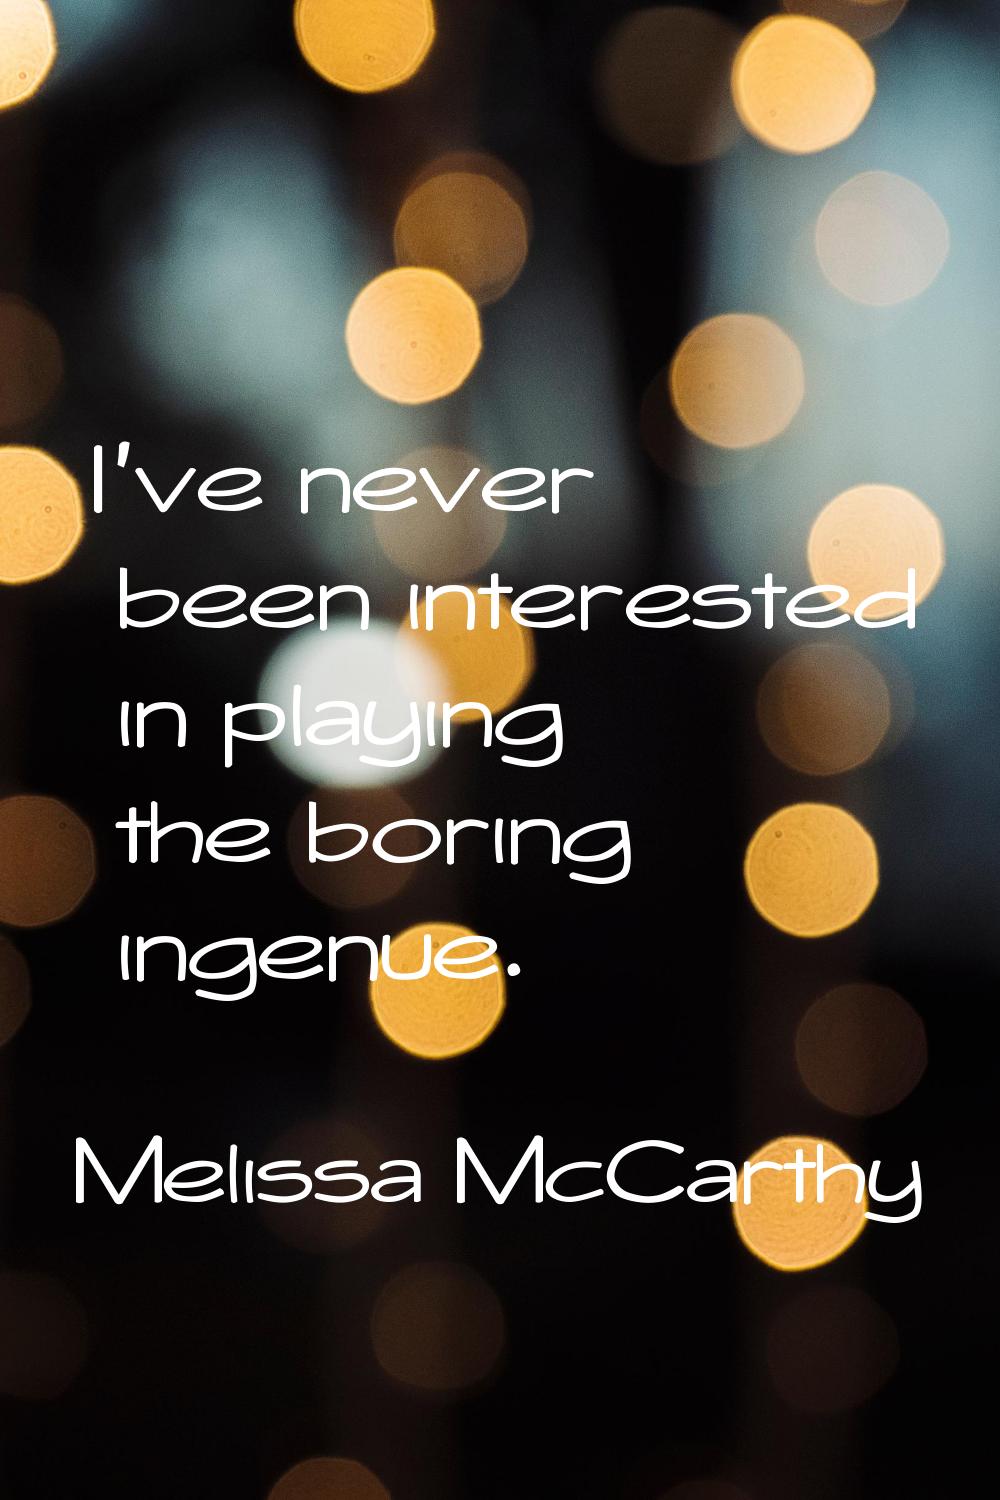 I've never been interested in playing the boring ingenue.